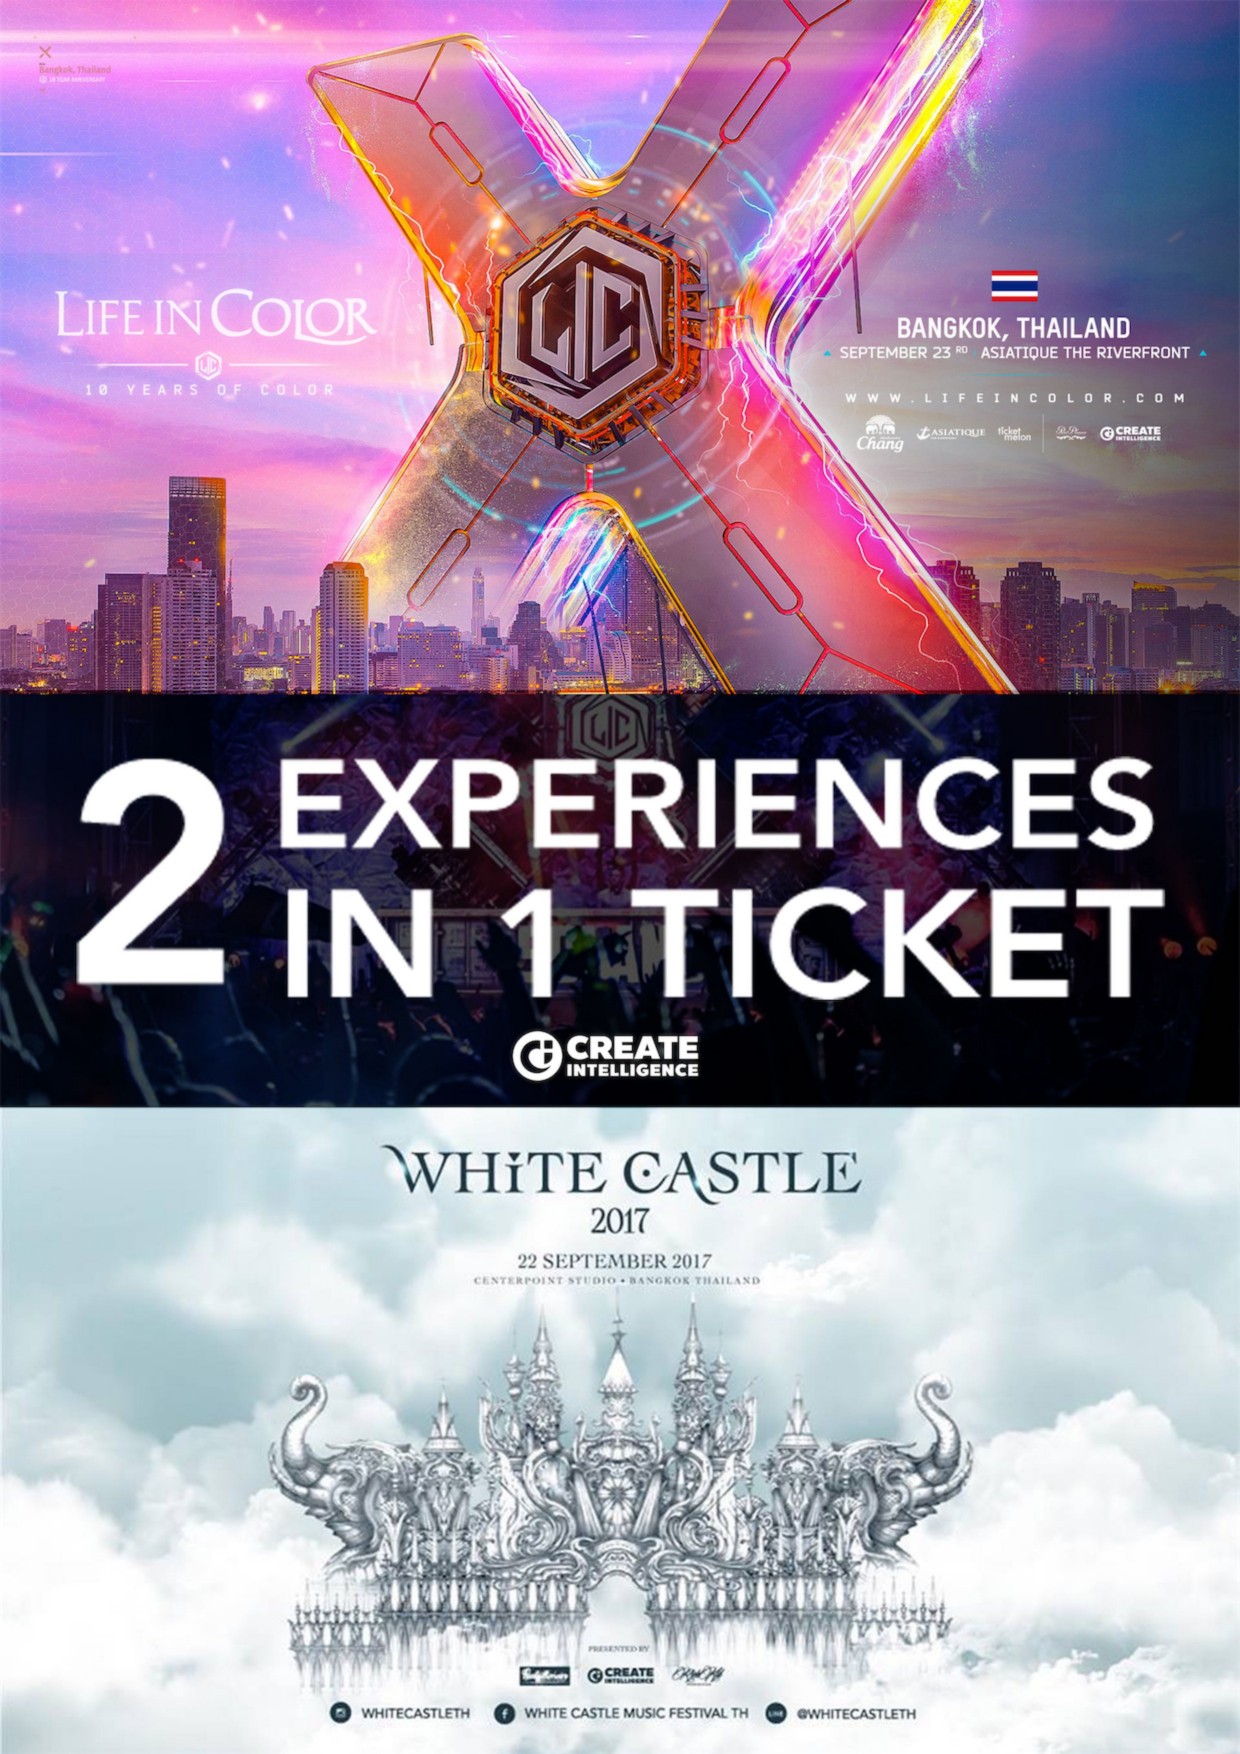 2 EXPERIENCES IN 1 TICKET